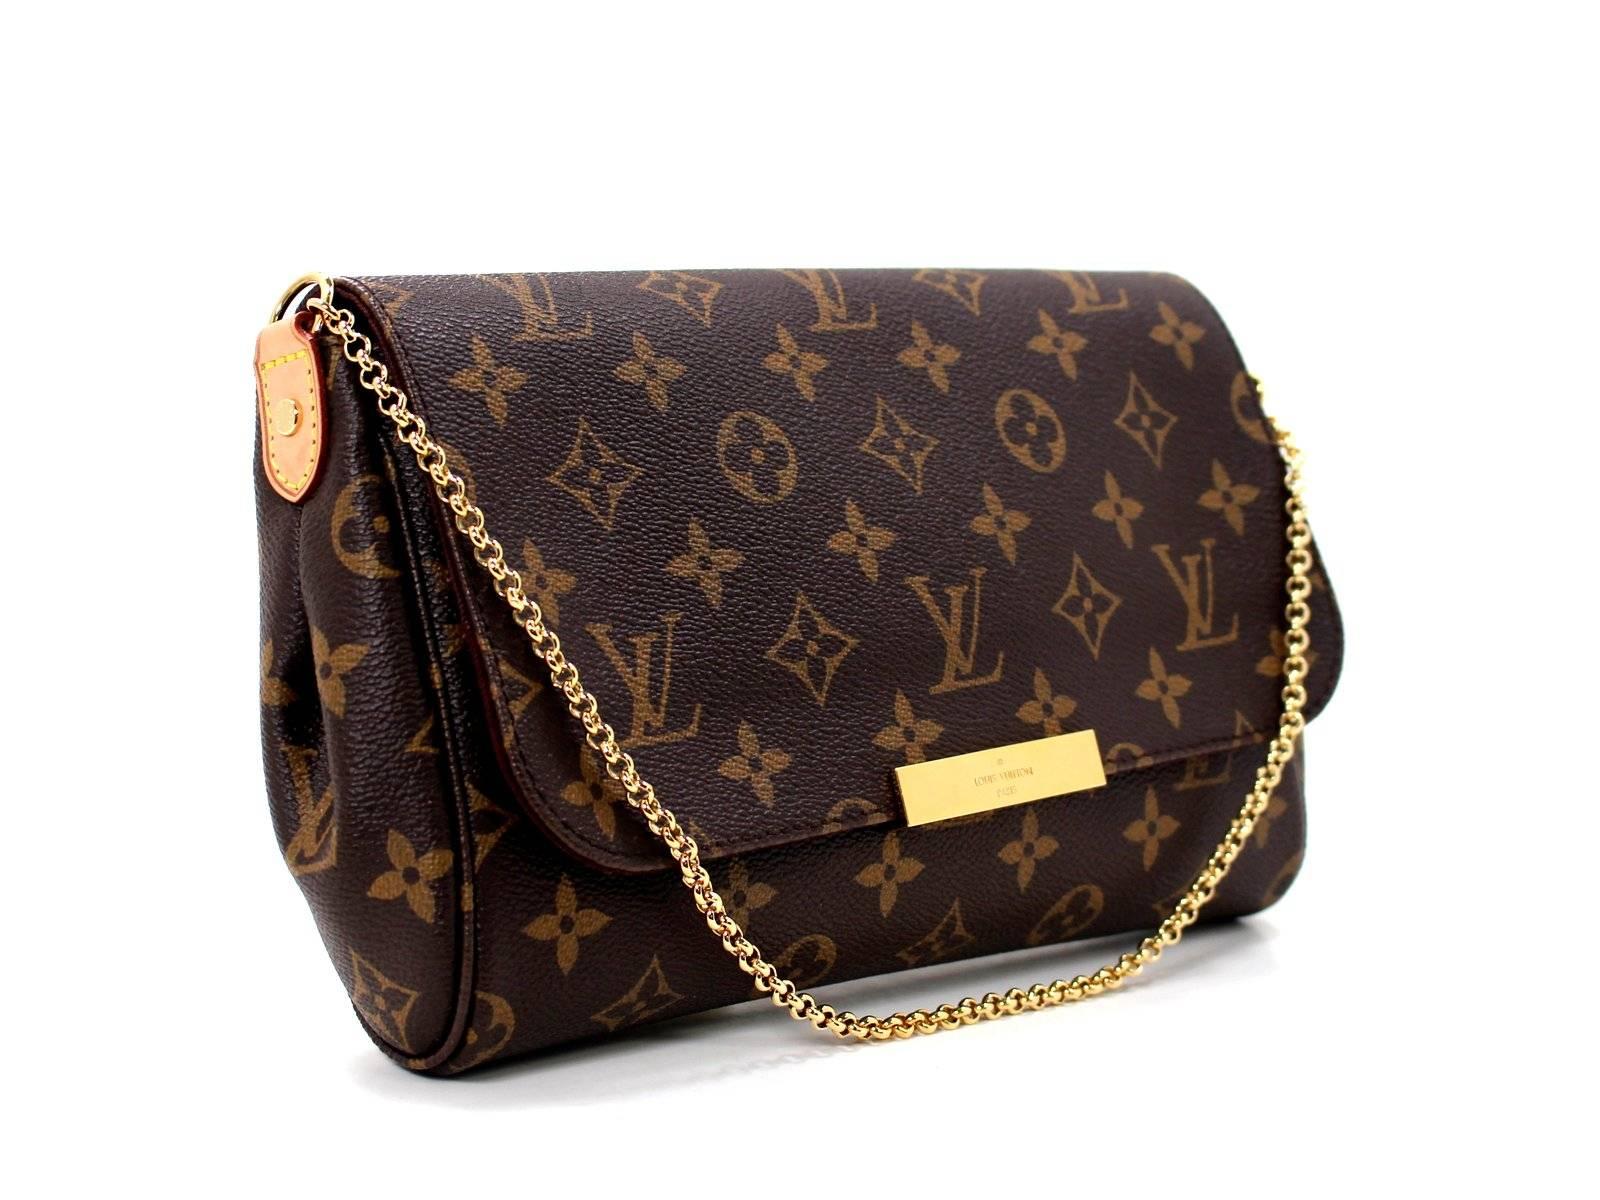 Louis Vuitton Monogram Favorite MM- MINT - Retail $985.00 plus taxes

Currently carried in LV boutiques.  Only mild scratching on the hardware plaque; the rest of the bag appears new. Chic and versatile- two different straps allow for shoulder or